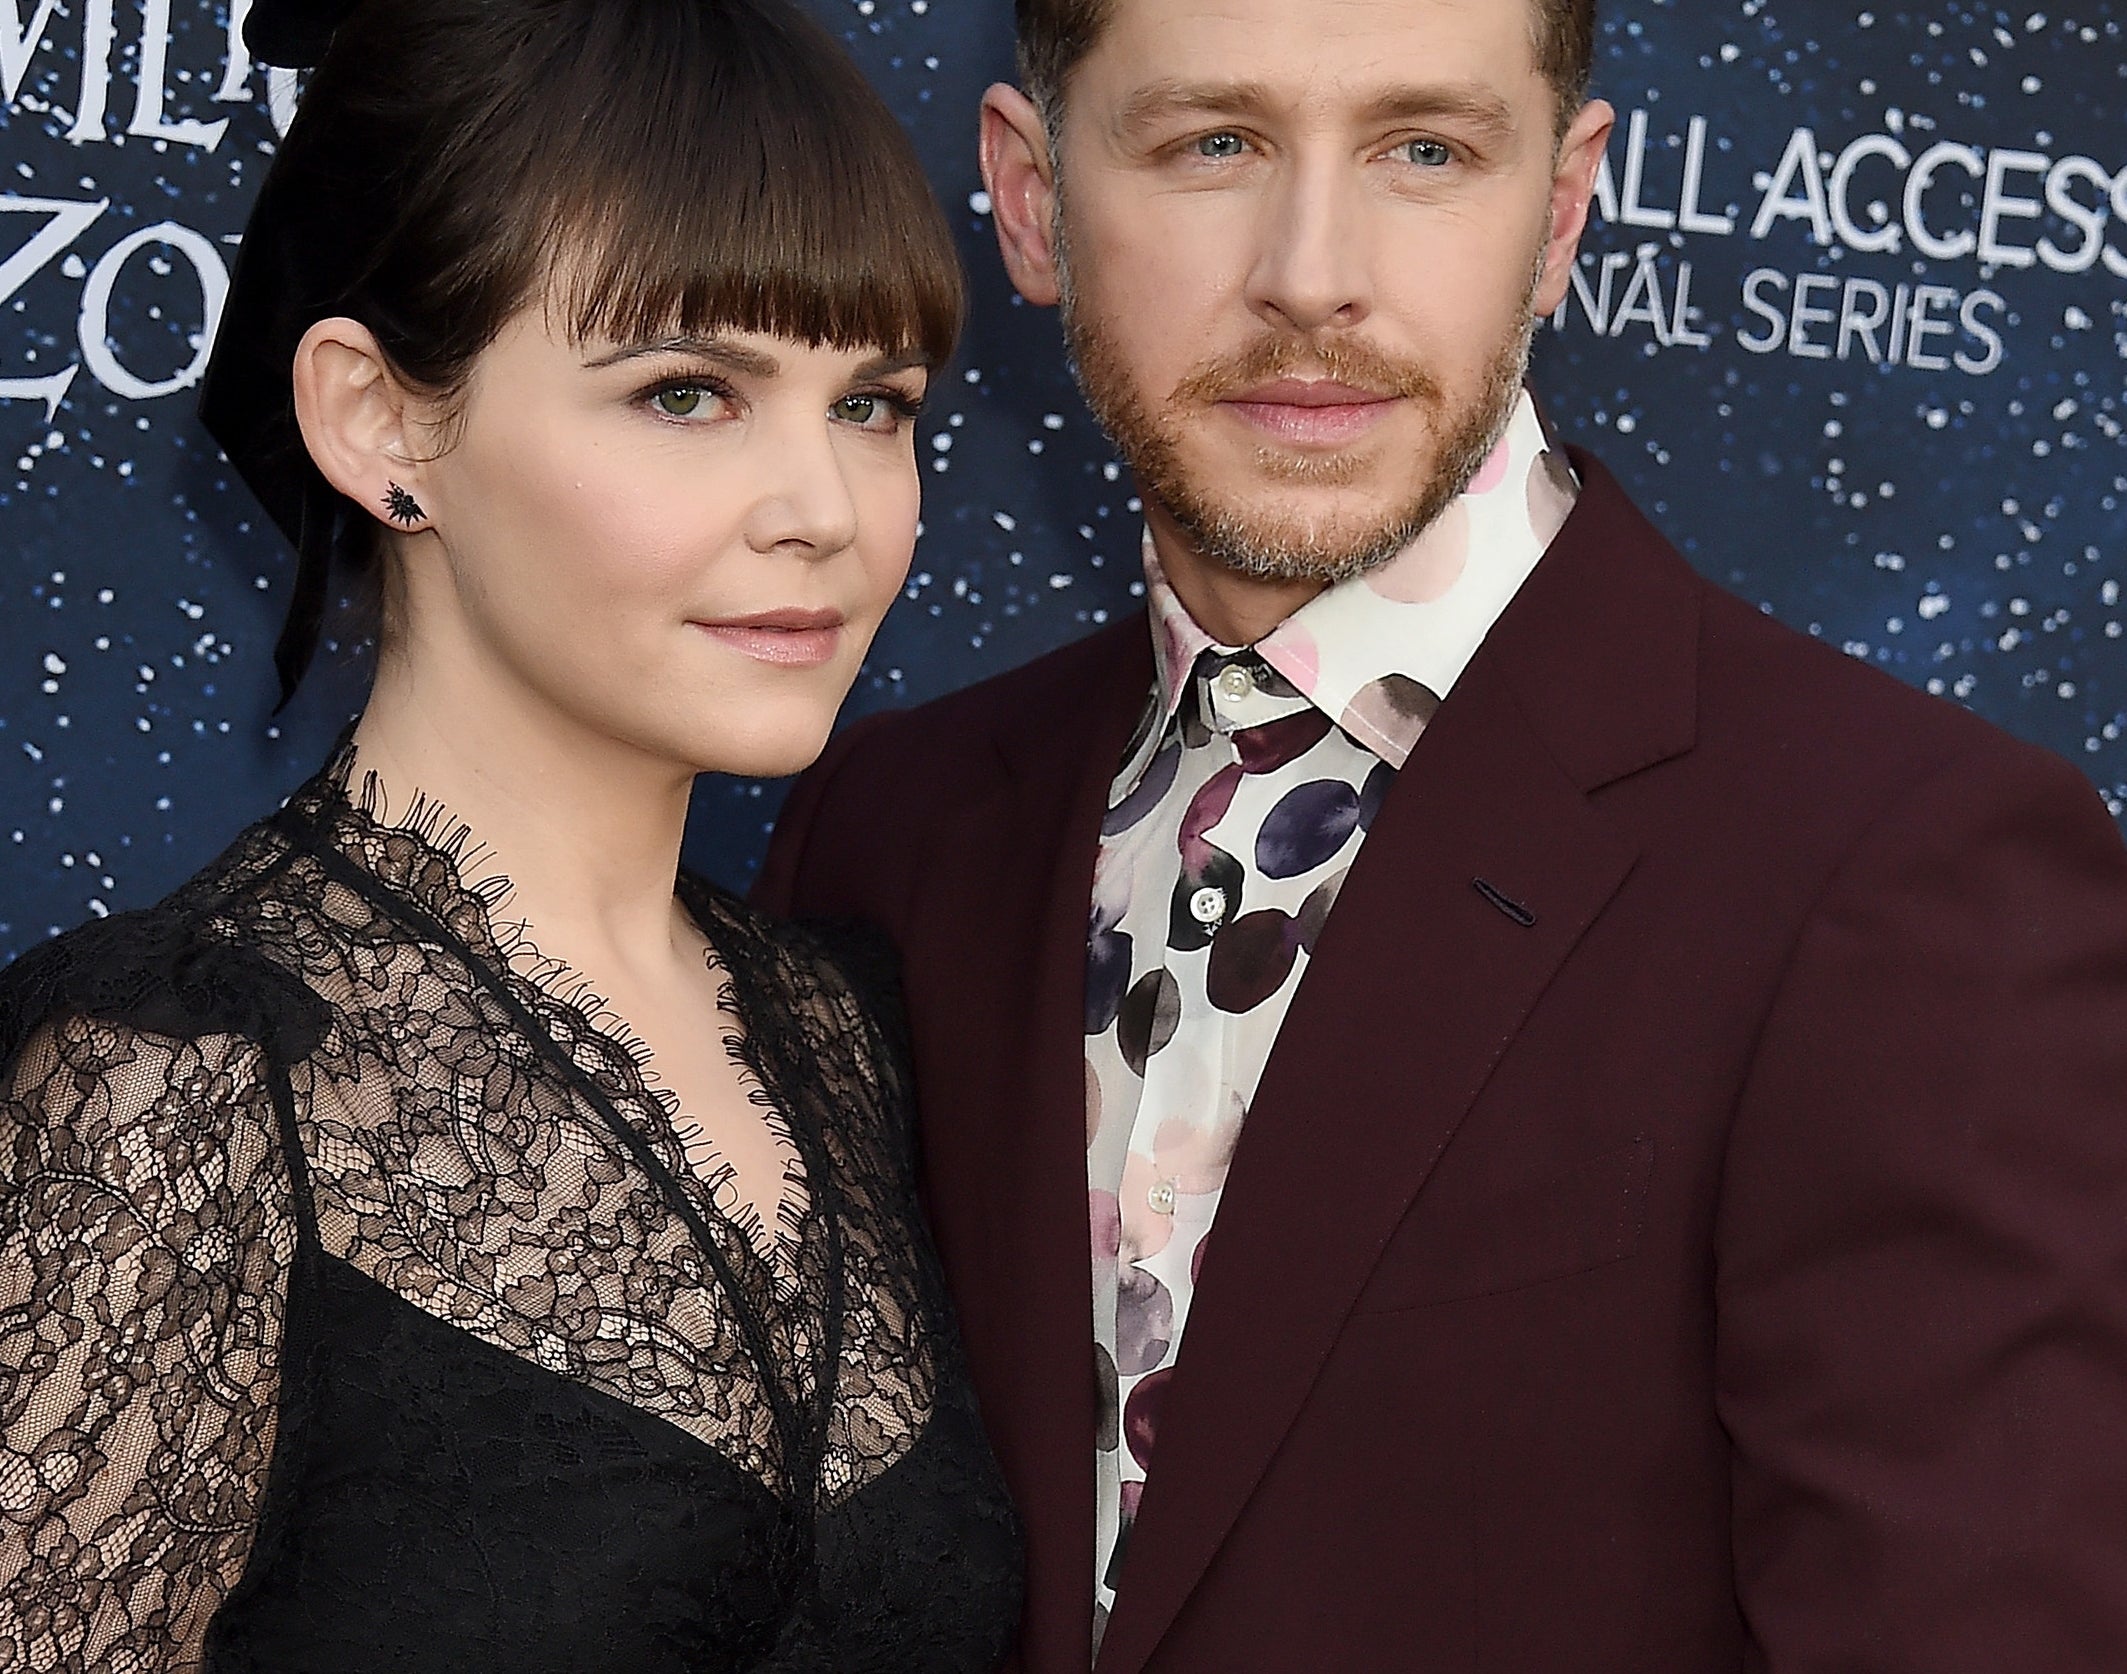 Ginnifer Goodwin and Josh Dallas on the red carpet